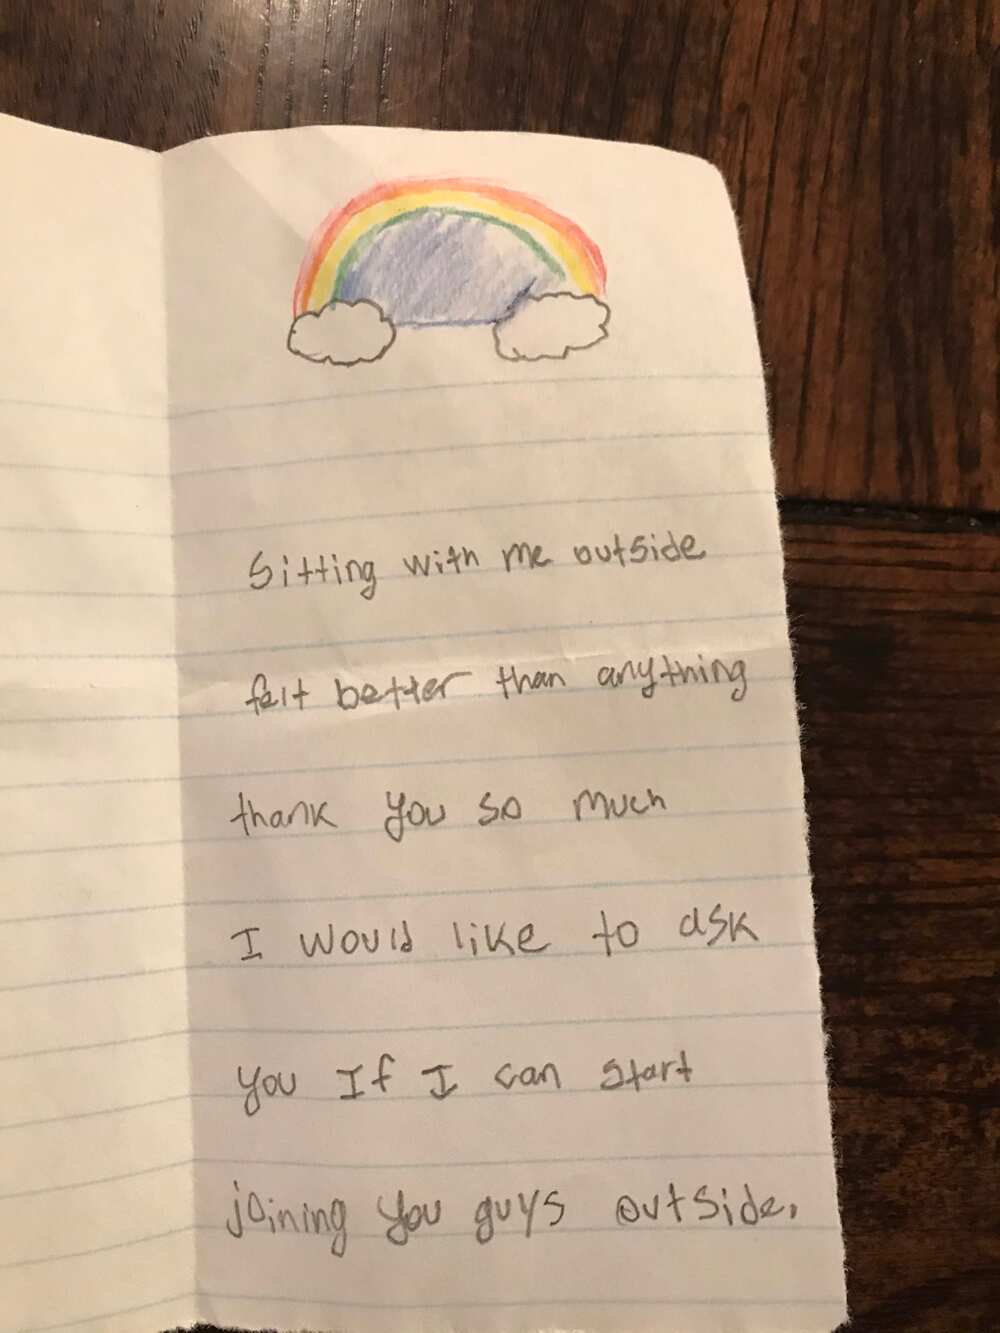 10-year-old boy gets sweet note from new kid after rare act of kindness, goes viral